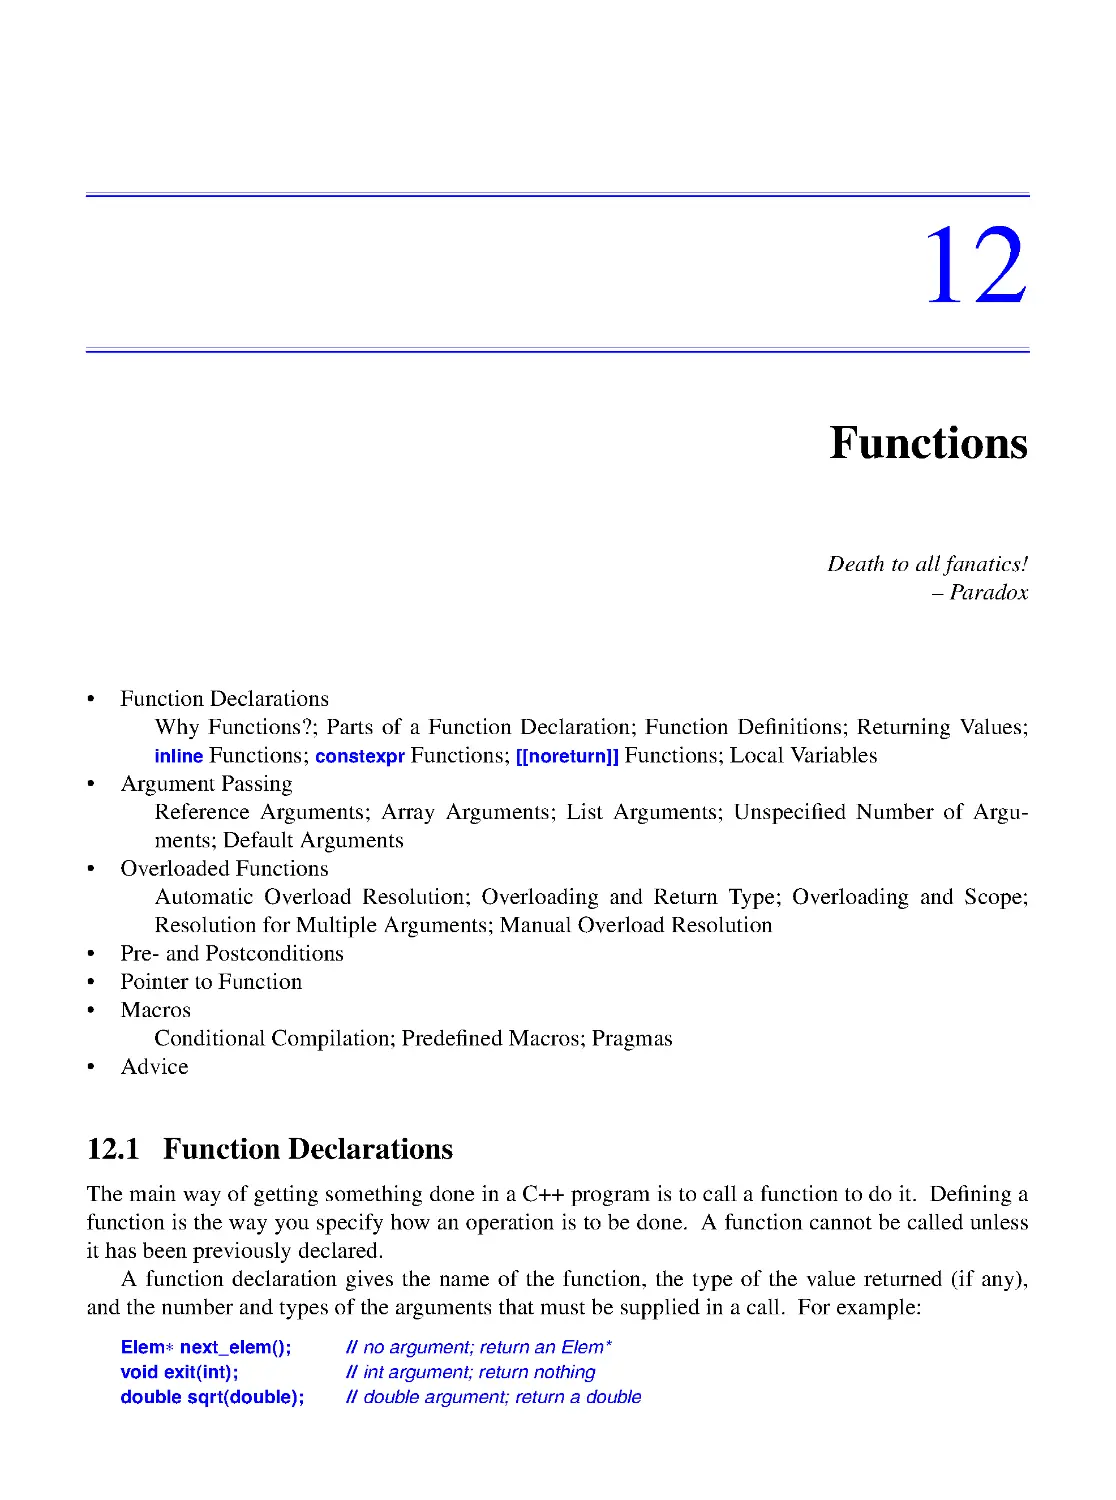 12. Functions